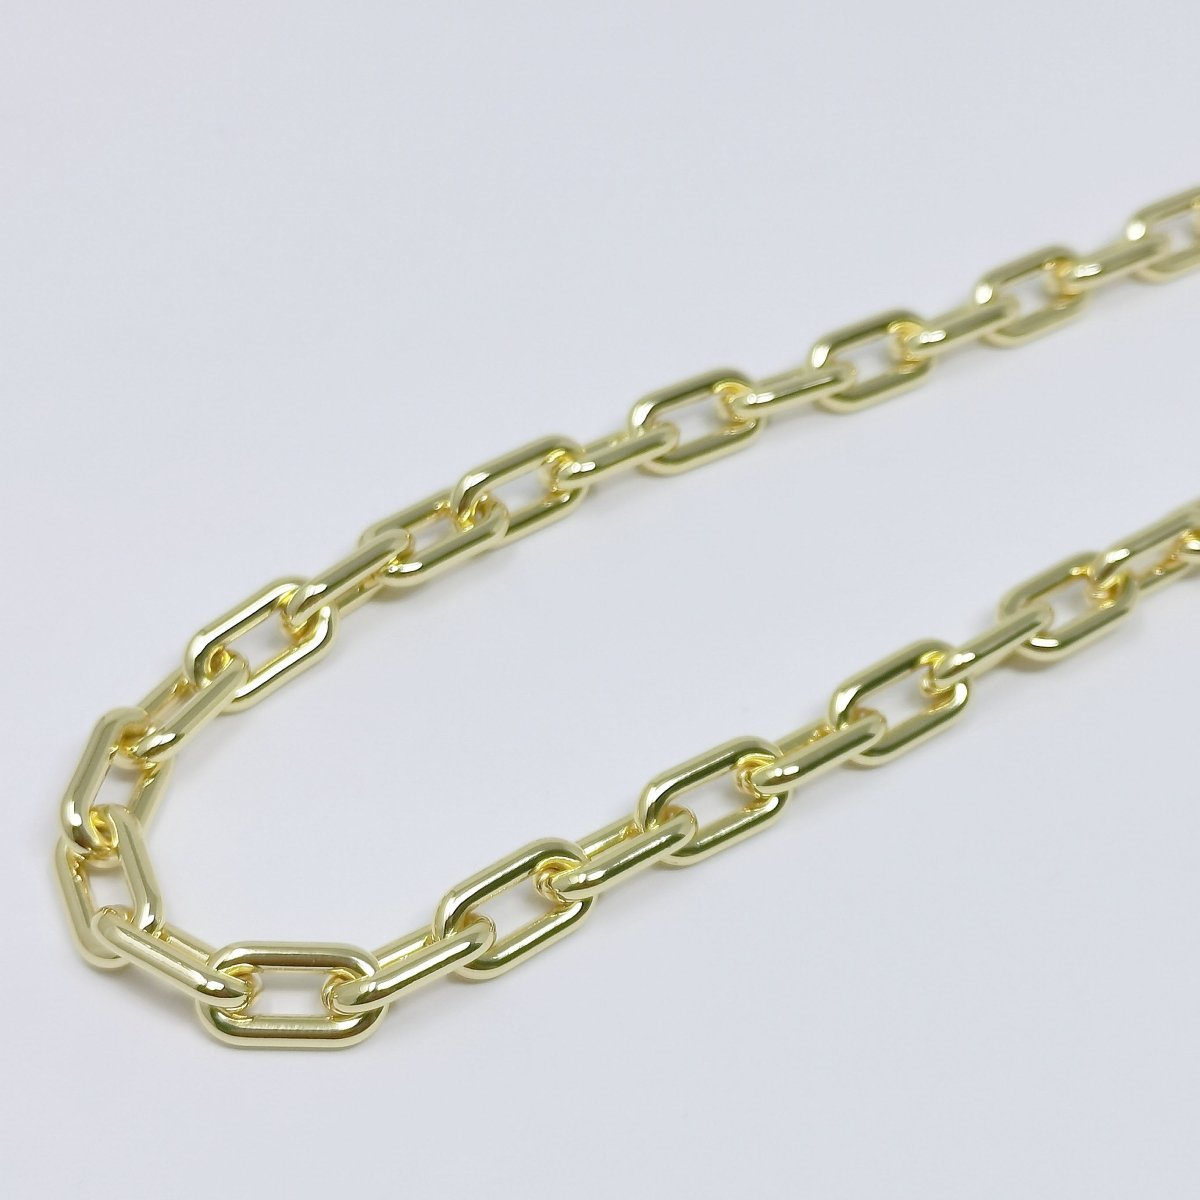 Thick PAPER CLIP Link Elongated, 24K Gold Filled Chain By Yard, Roll Chain For DIY Jewelry Craft Making | ROLL-362 Clearance Pricing - DLUXCA